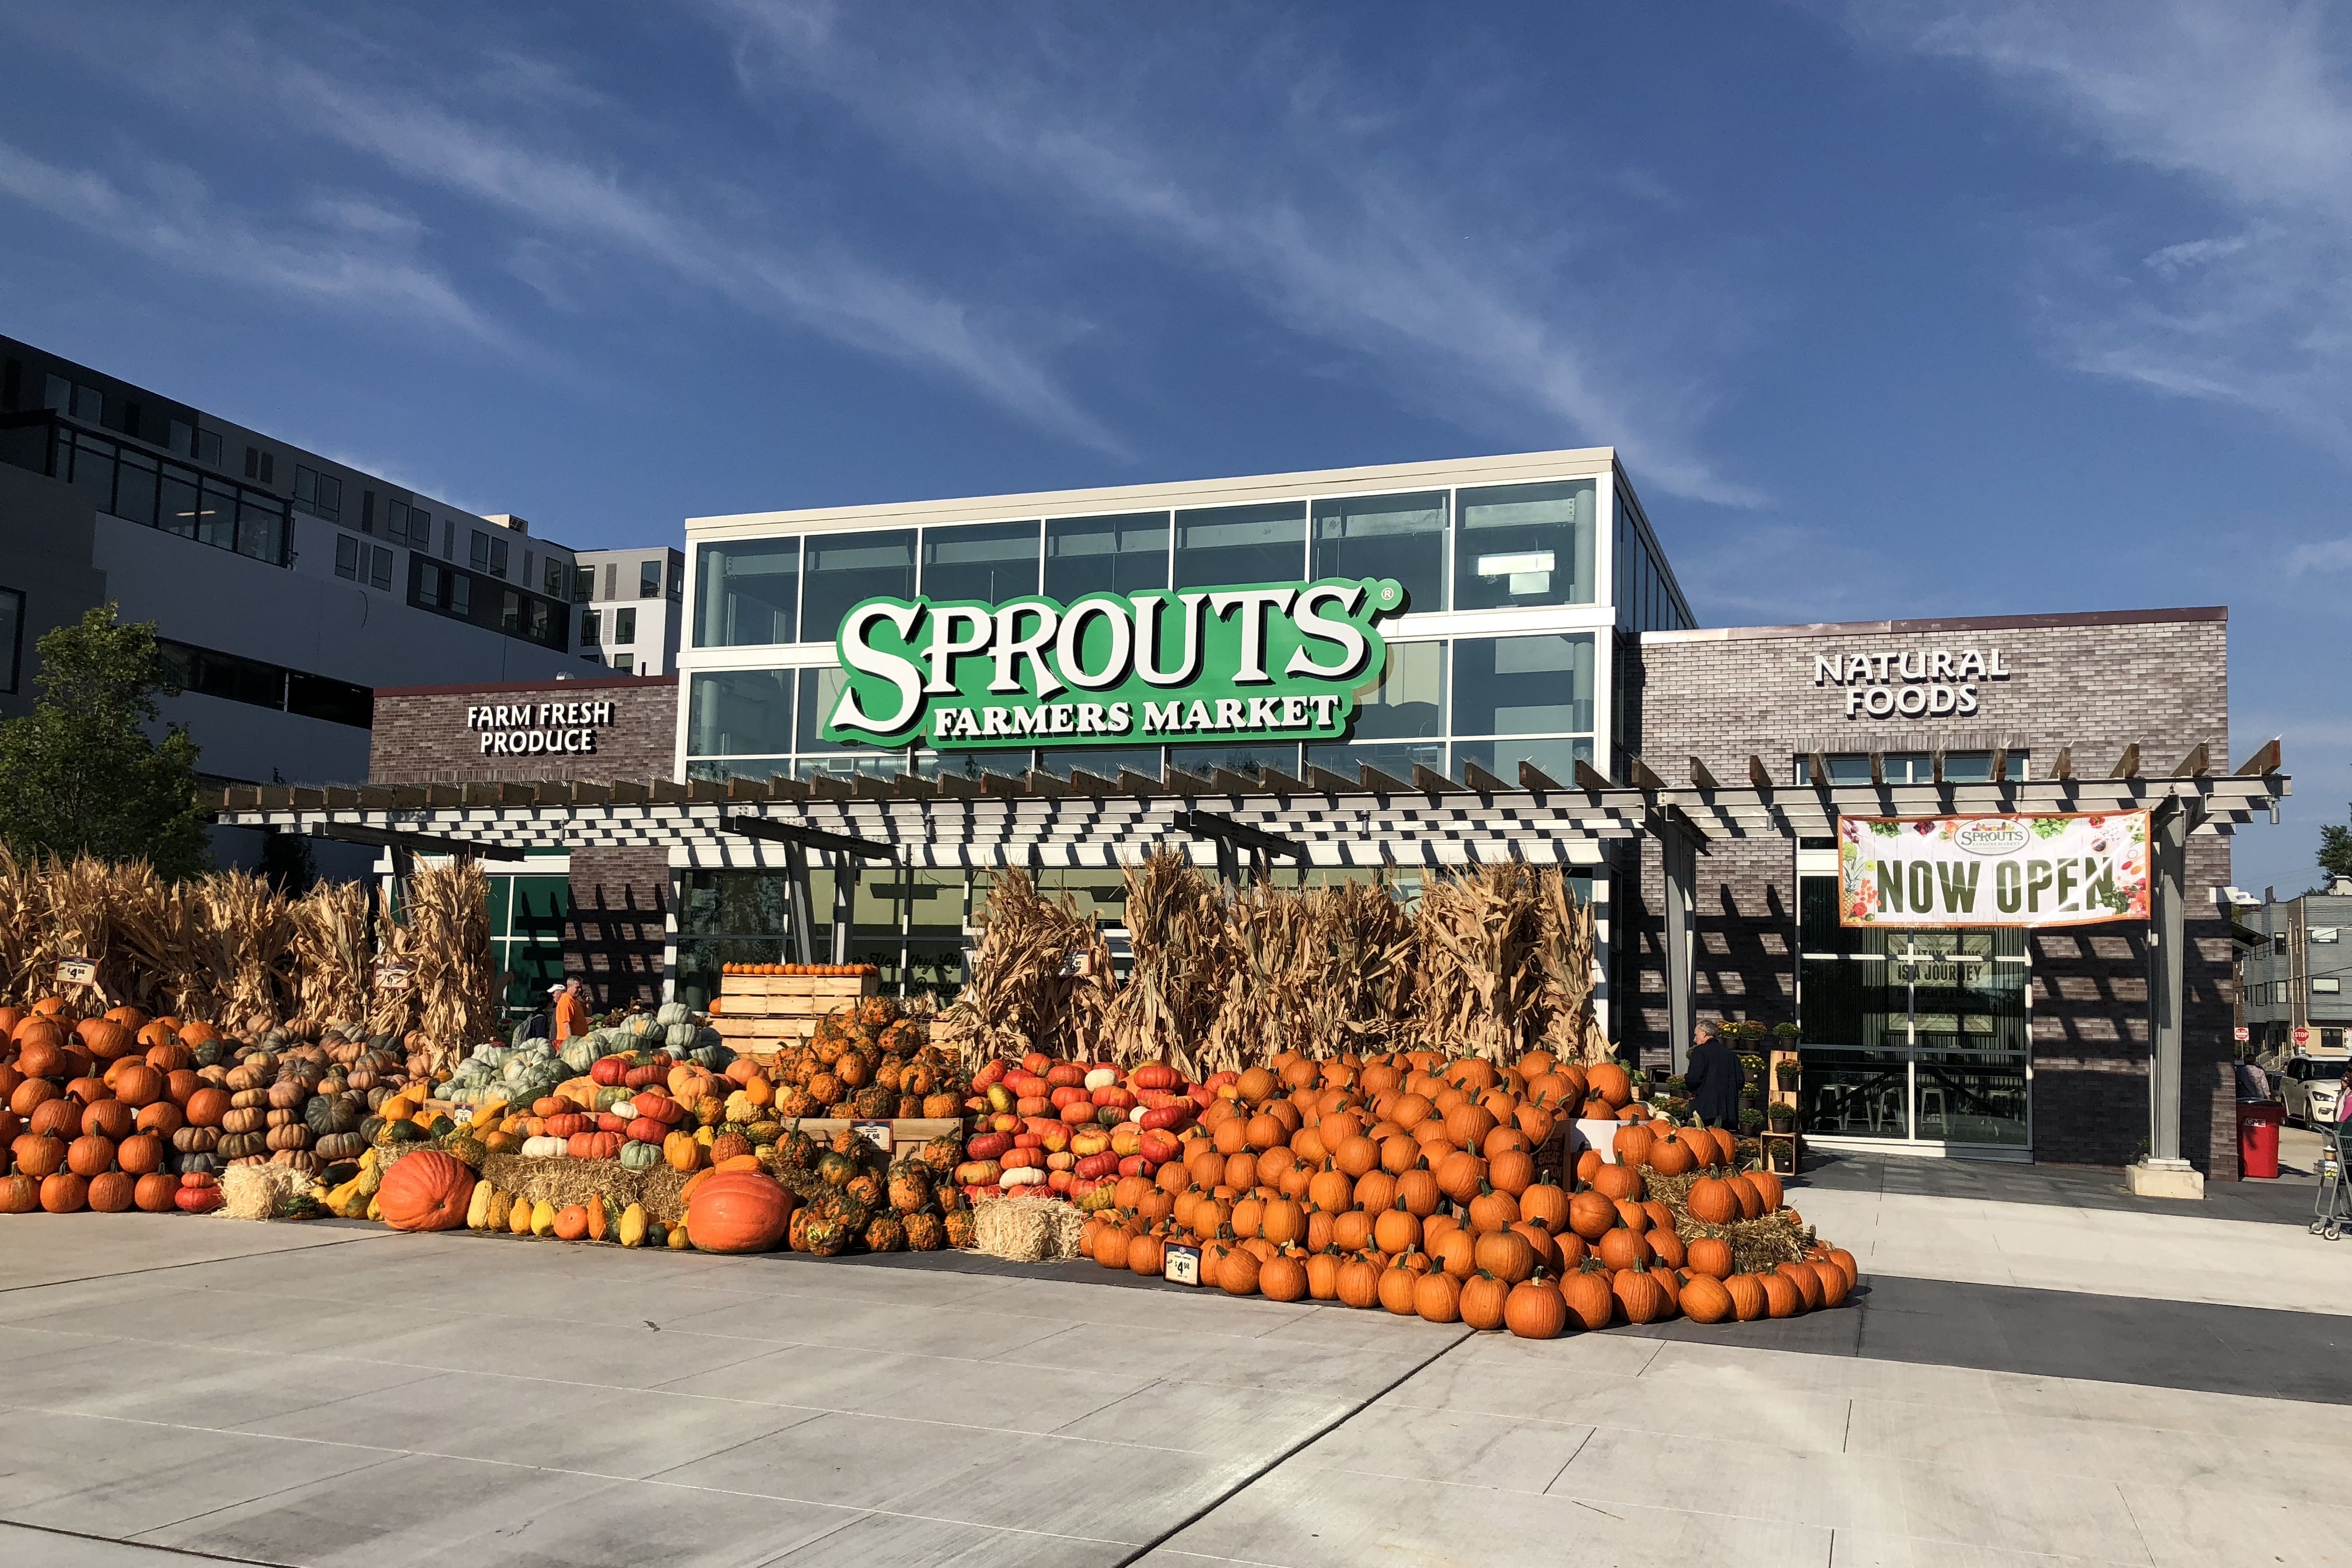 sprouts farmers market business model